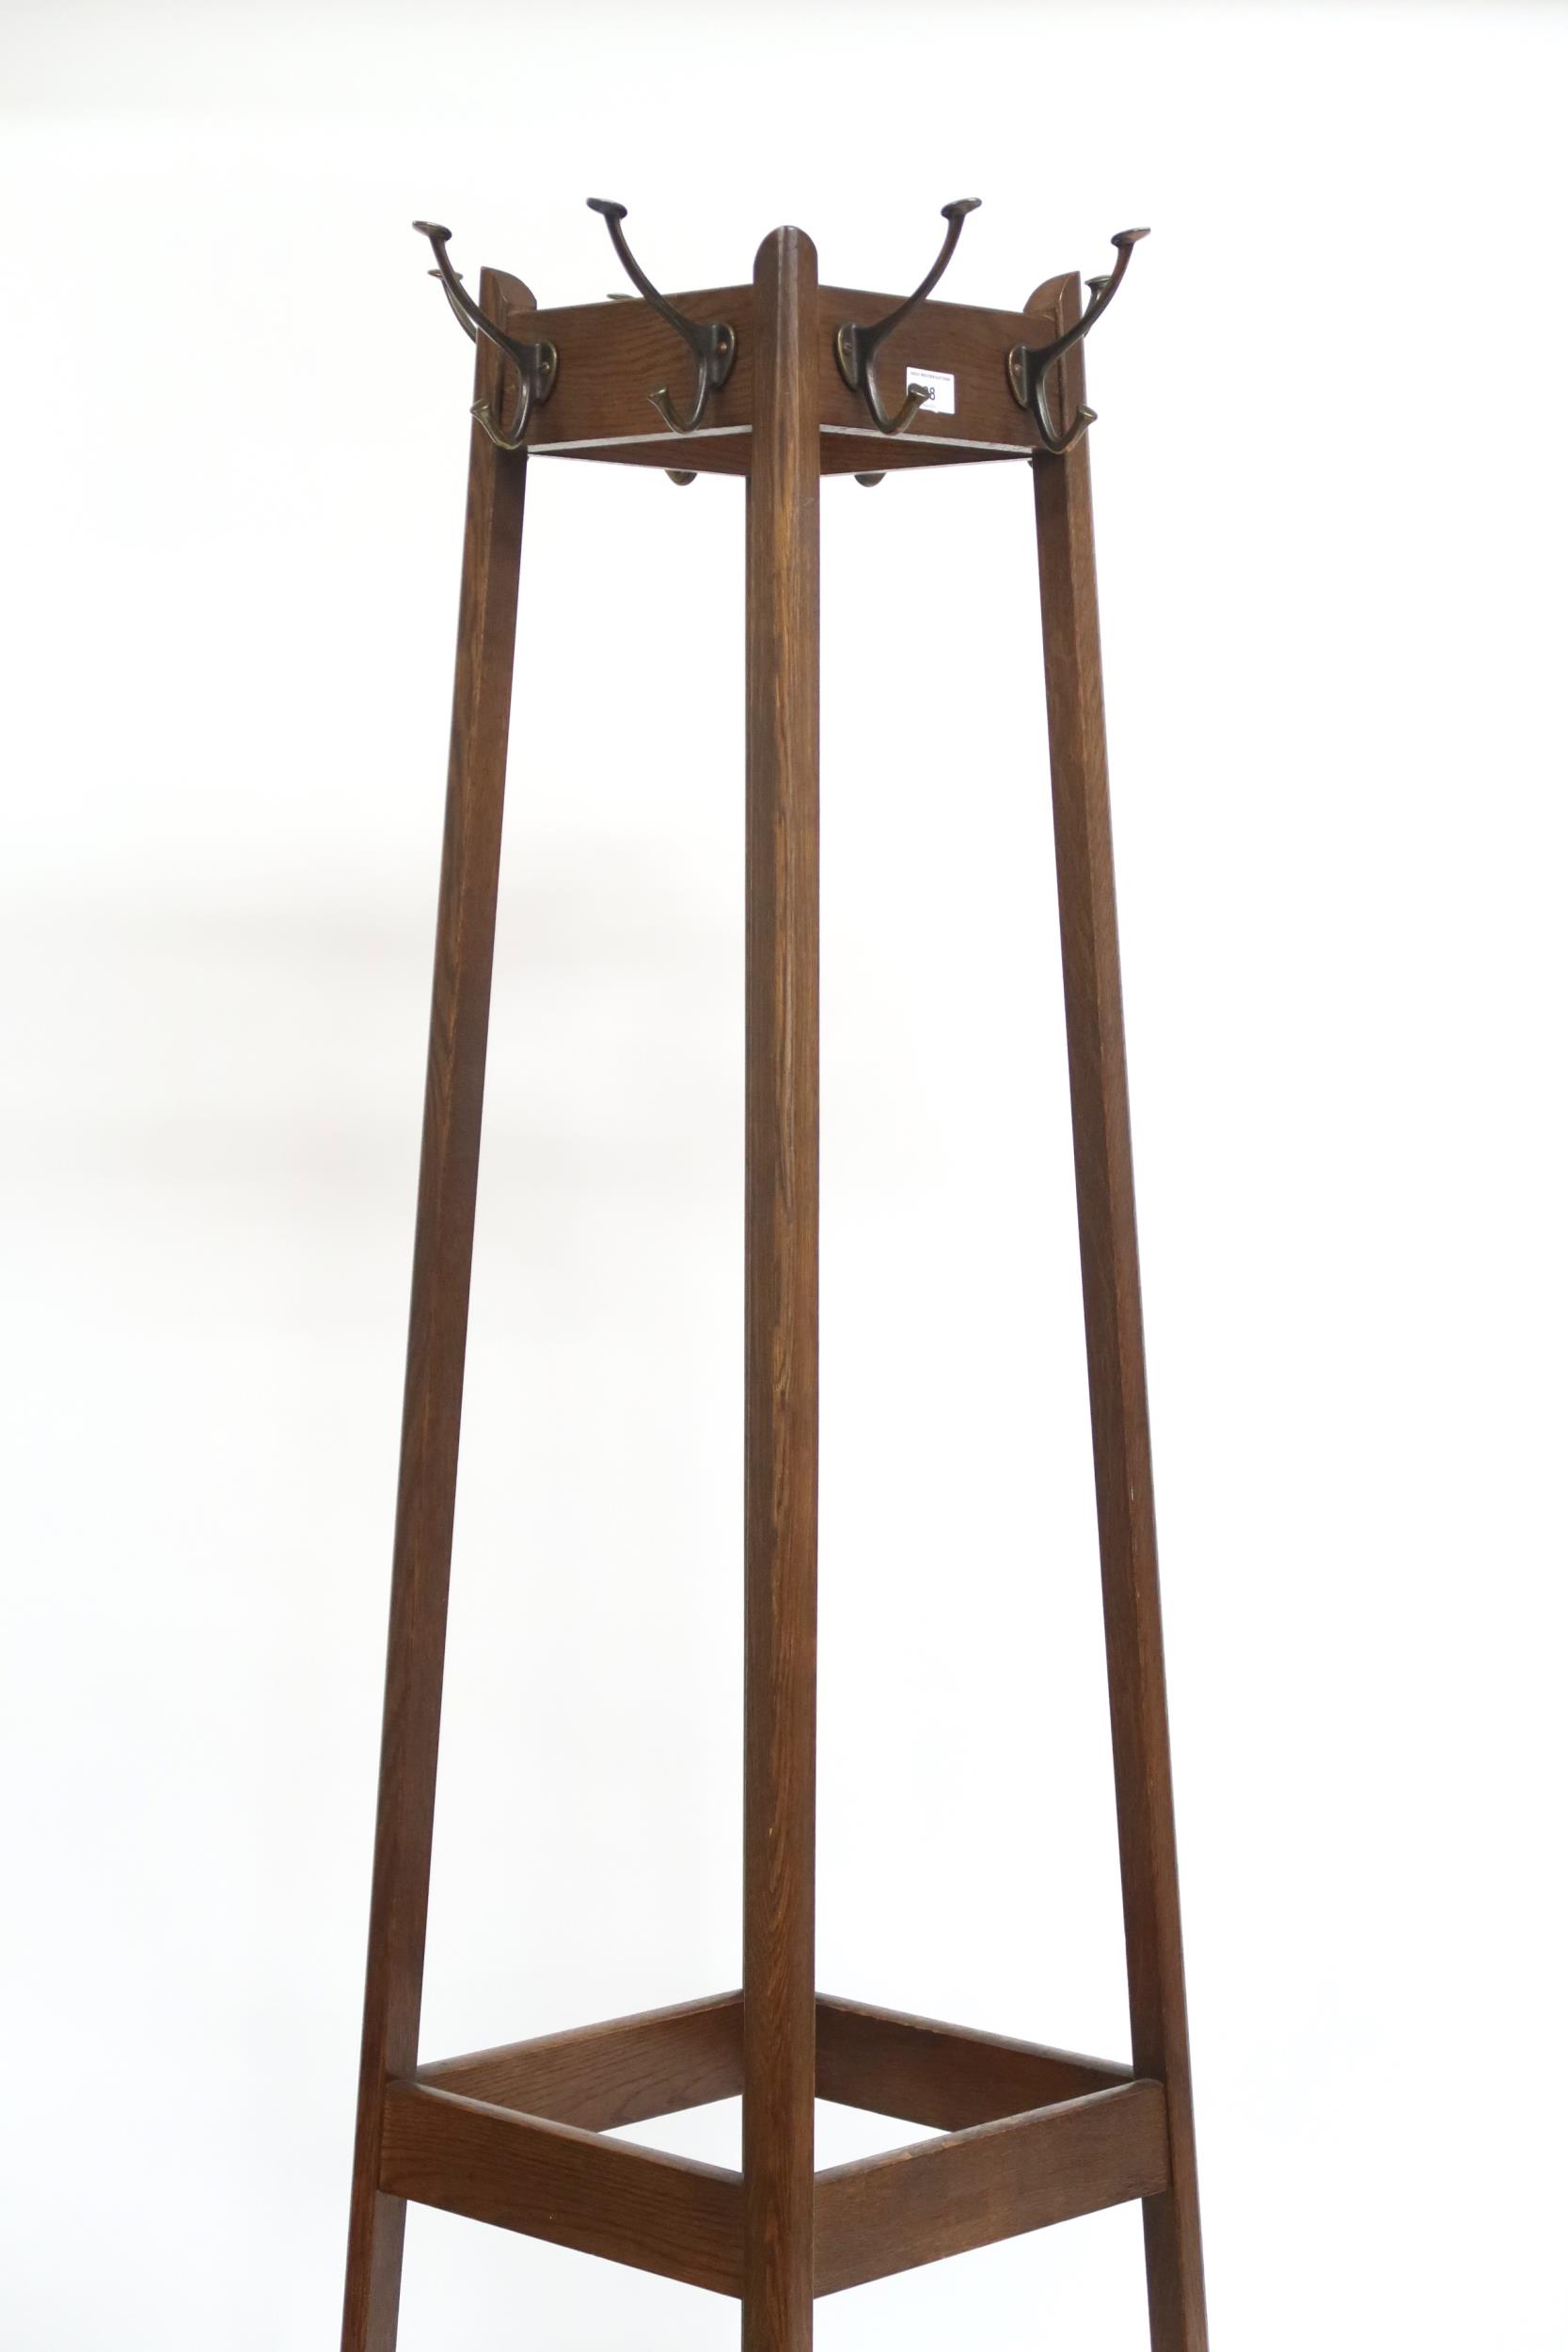 An early 20th century oak freestanding hat and coat stand with stylized metallic hooks to each side, - Image 3 of 3